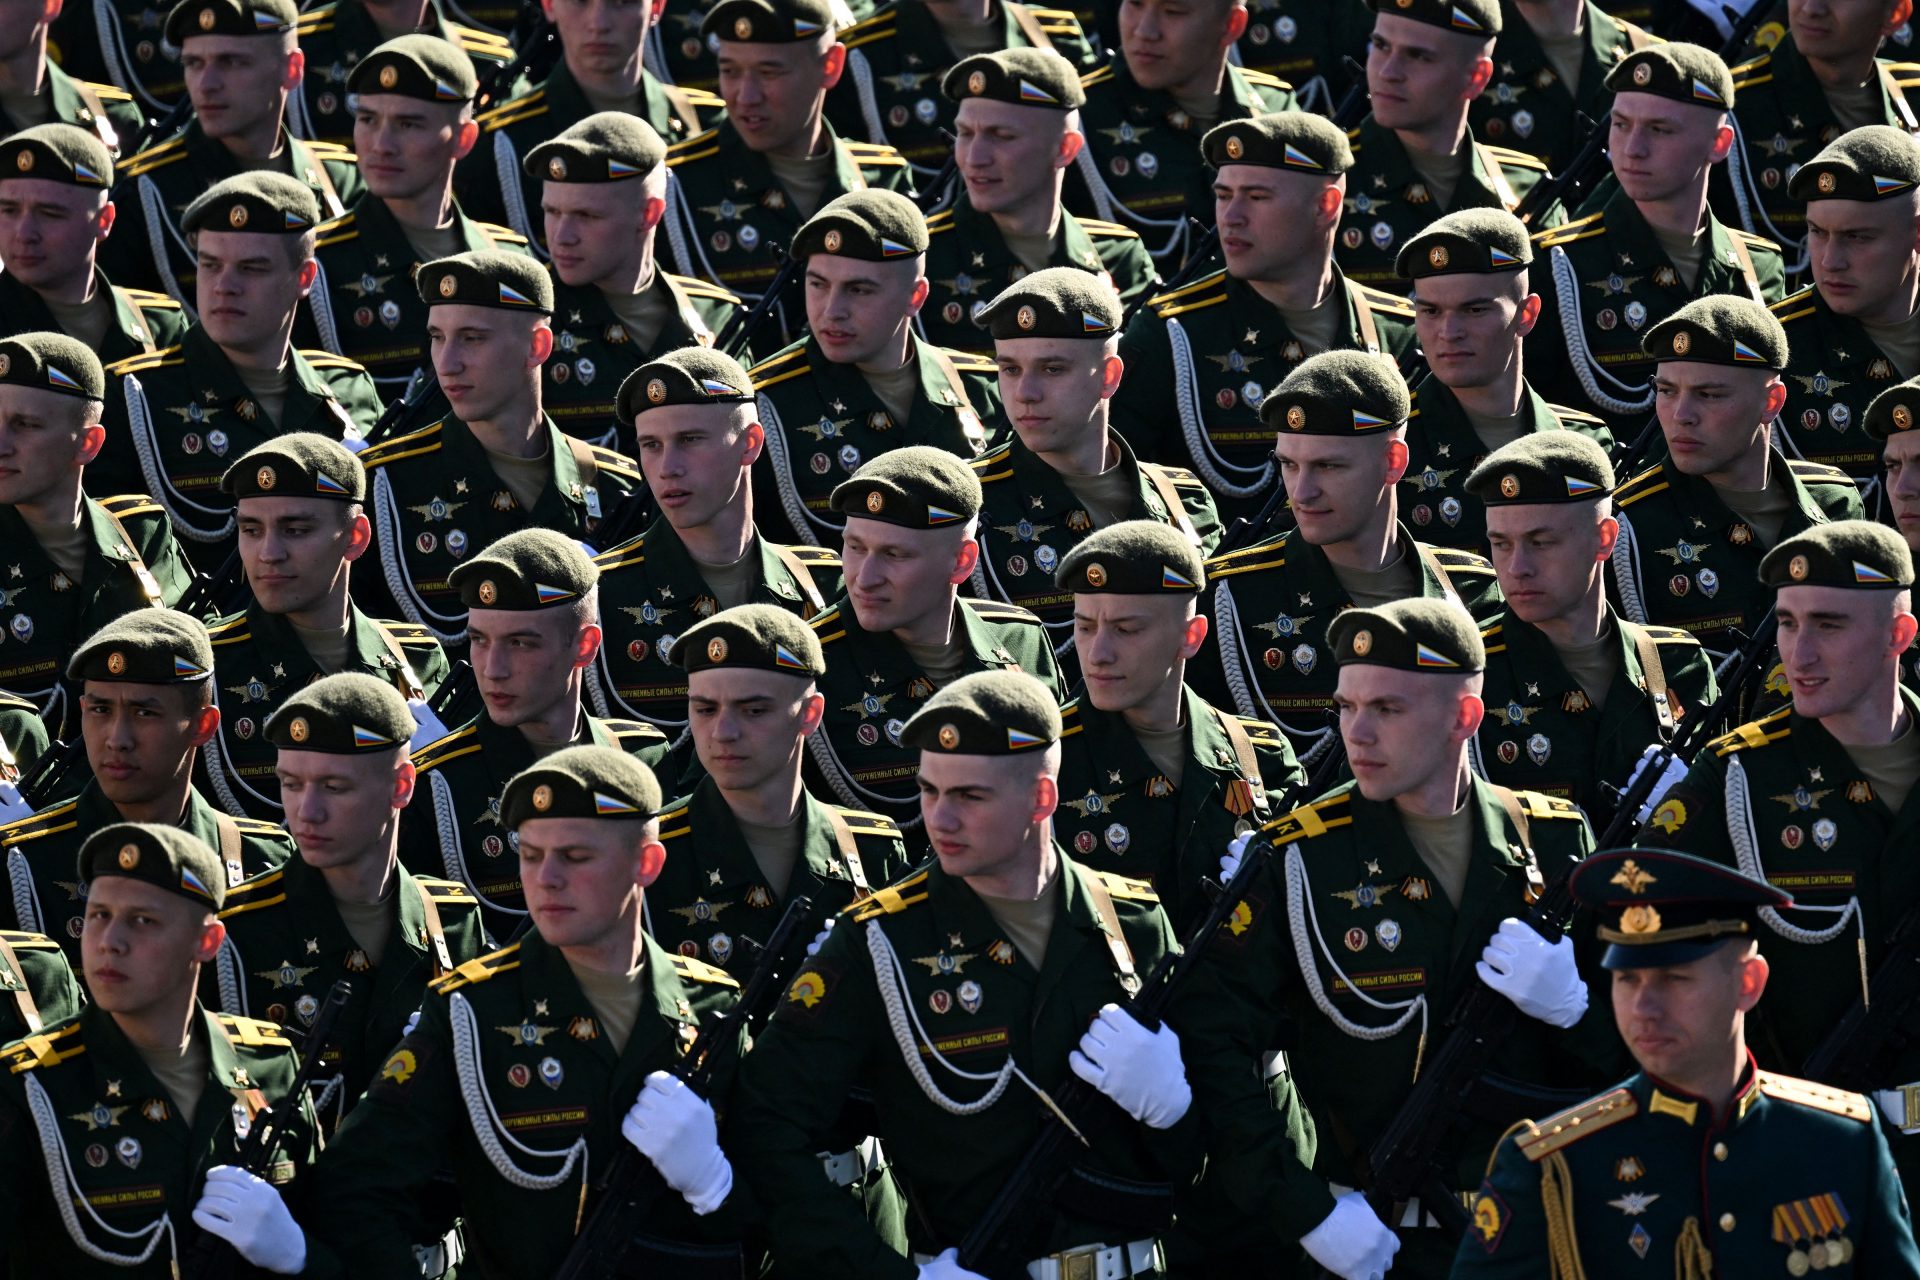 <p><span>In the foreword to the Estonia report, Rosin wrote that NATO would face a Soviet-style army that would be technologically inferior to the military that could be brought to bear against it by the West, but it would still pose a threat due to its size.</span></p>